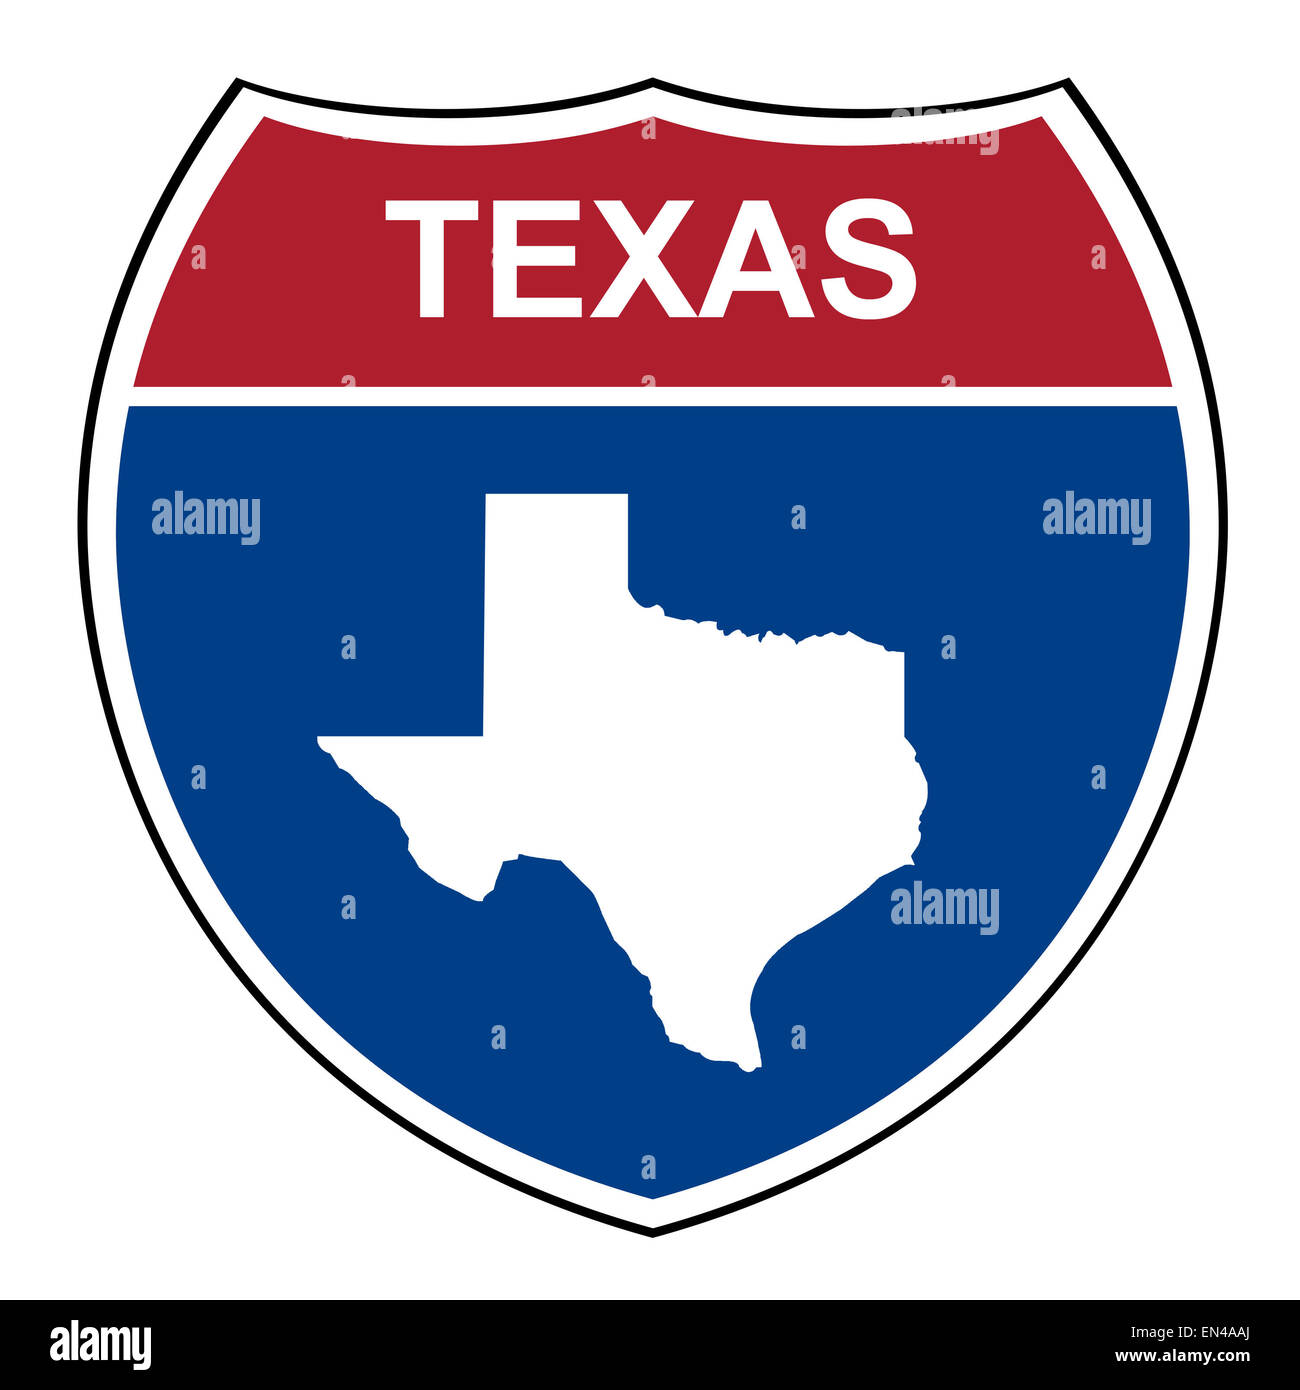 Texas American interstate highway road shield isolated on a white background. Stock Photo